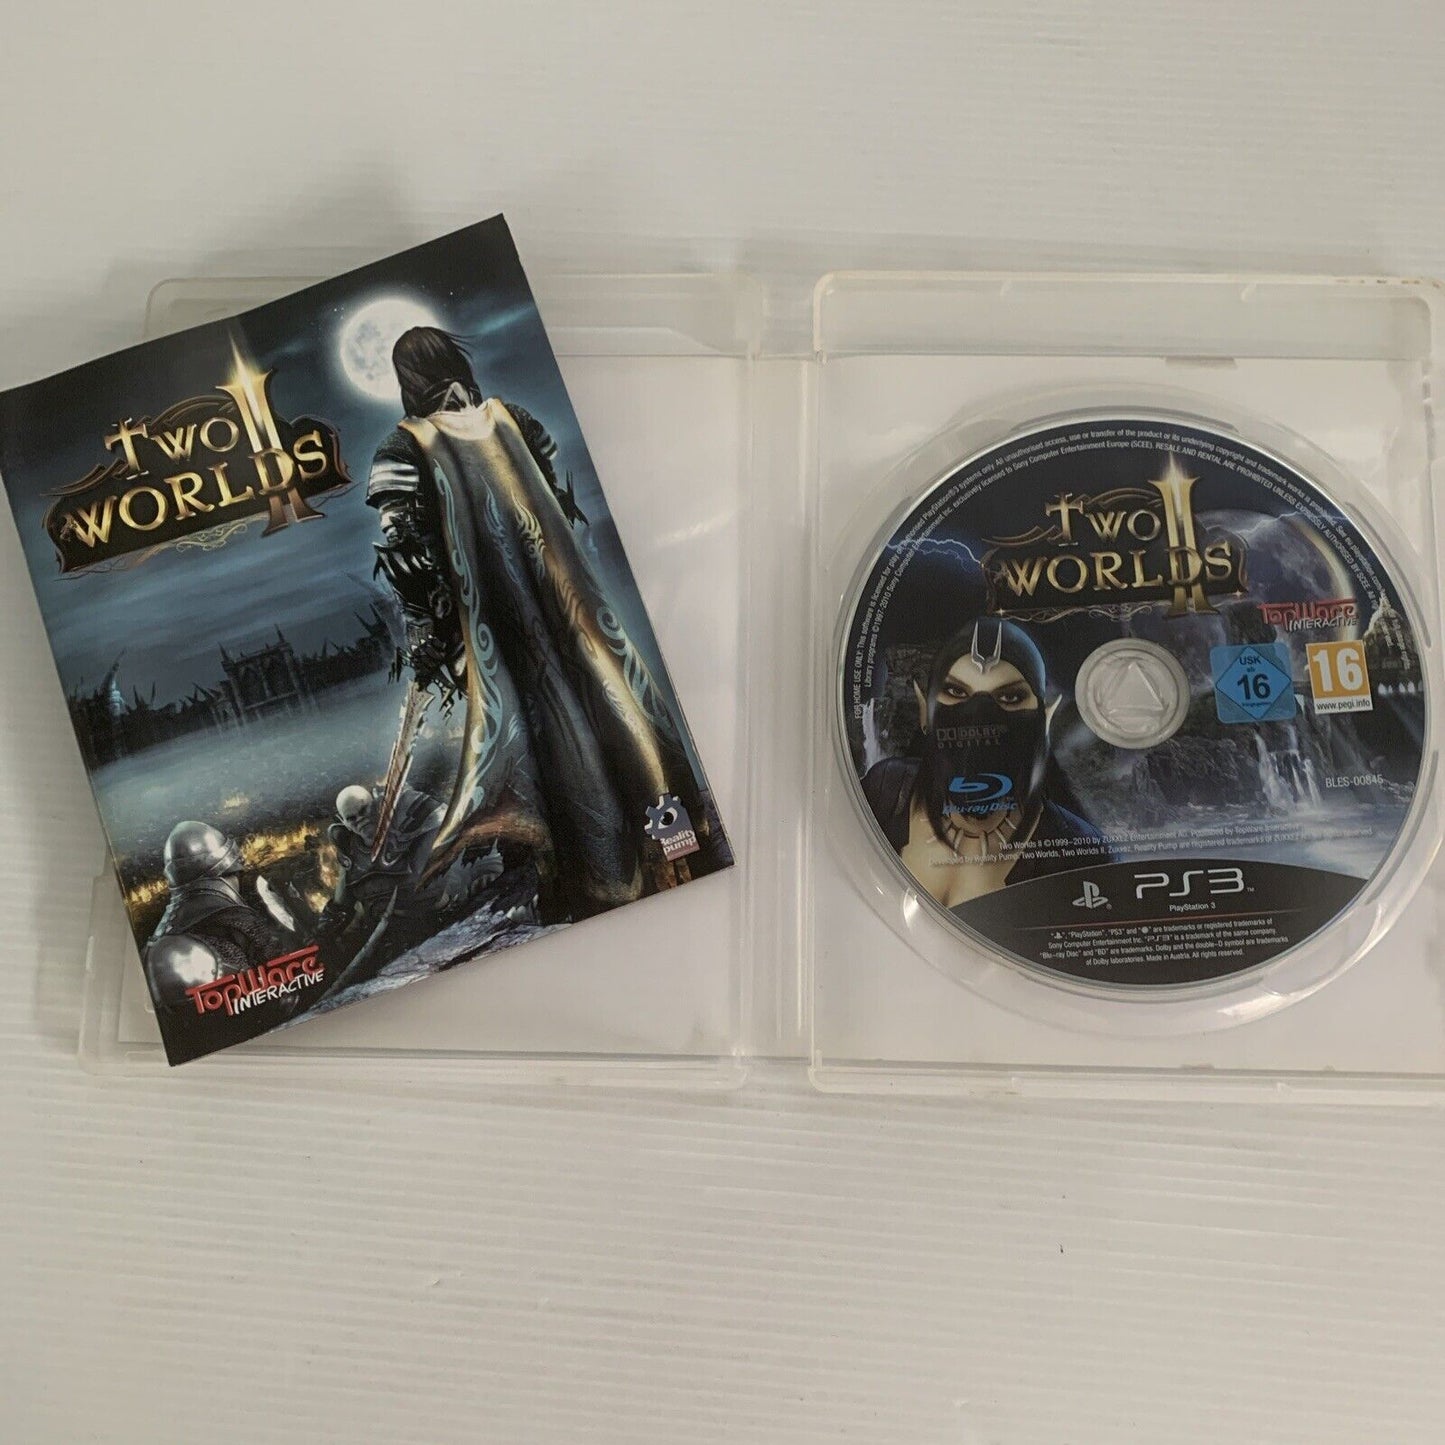 Two Worlds II 2 PlayStation 3 PS3 Game